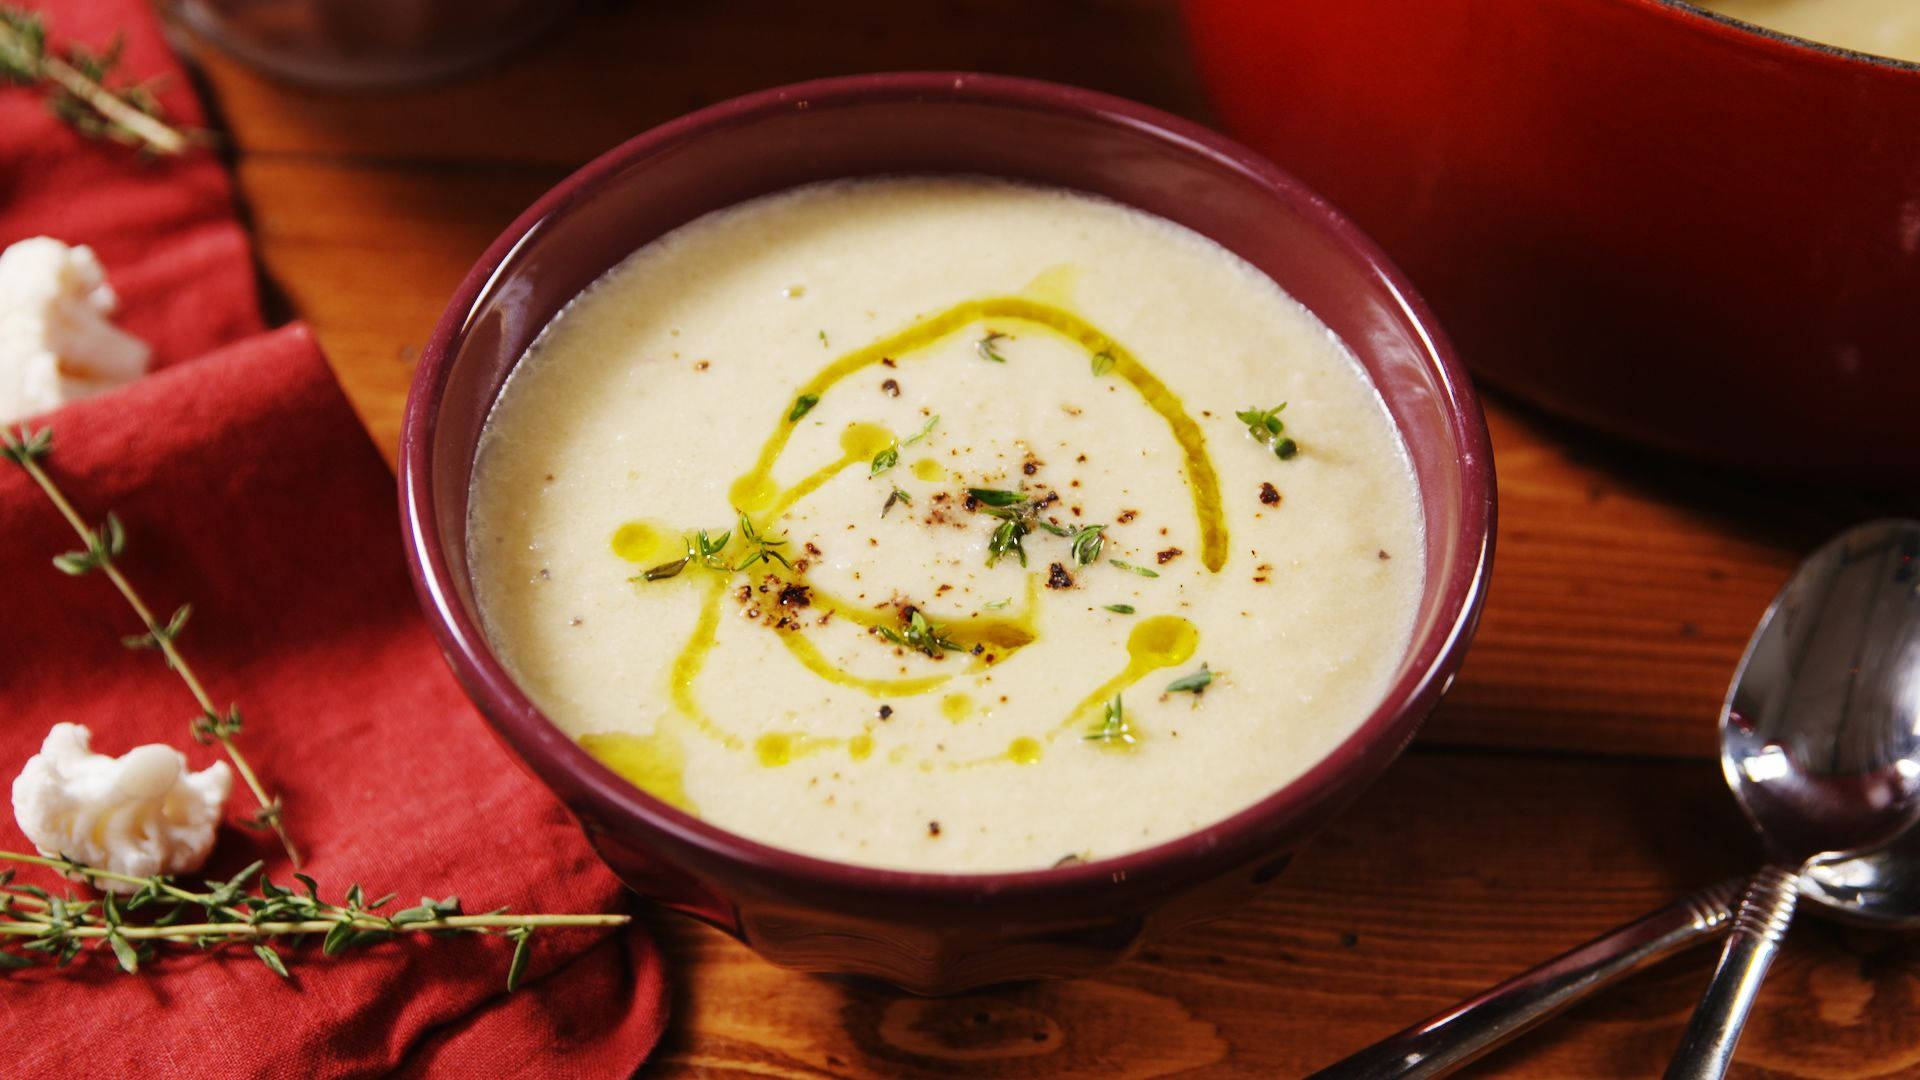 A wholesome bowl of Cauliflower Soup in a red bowl. Wallpaper